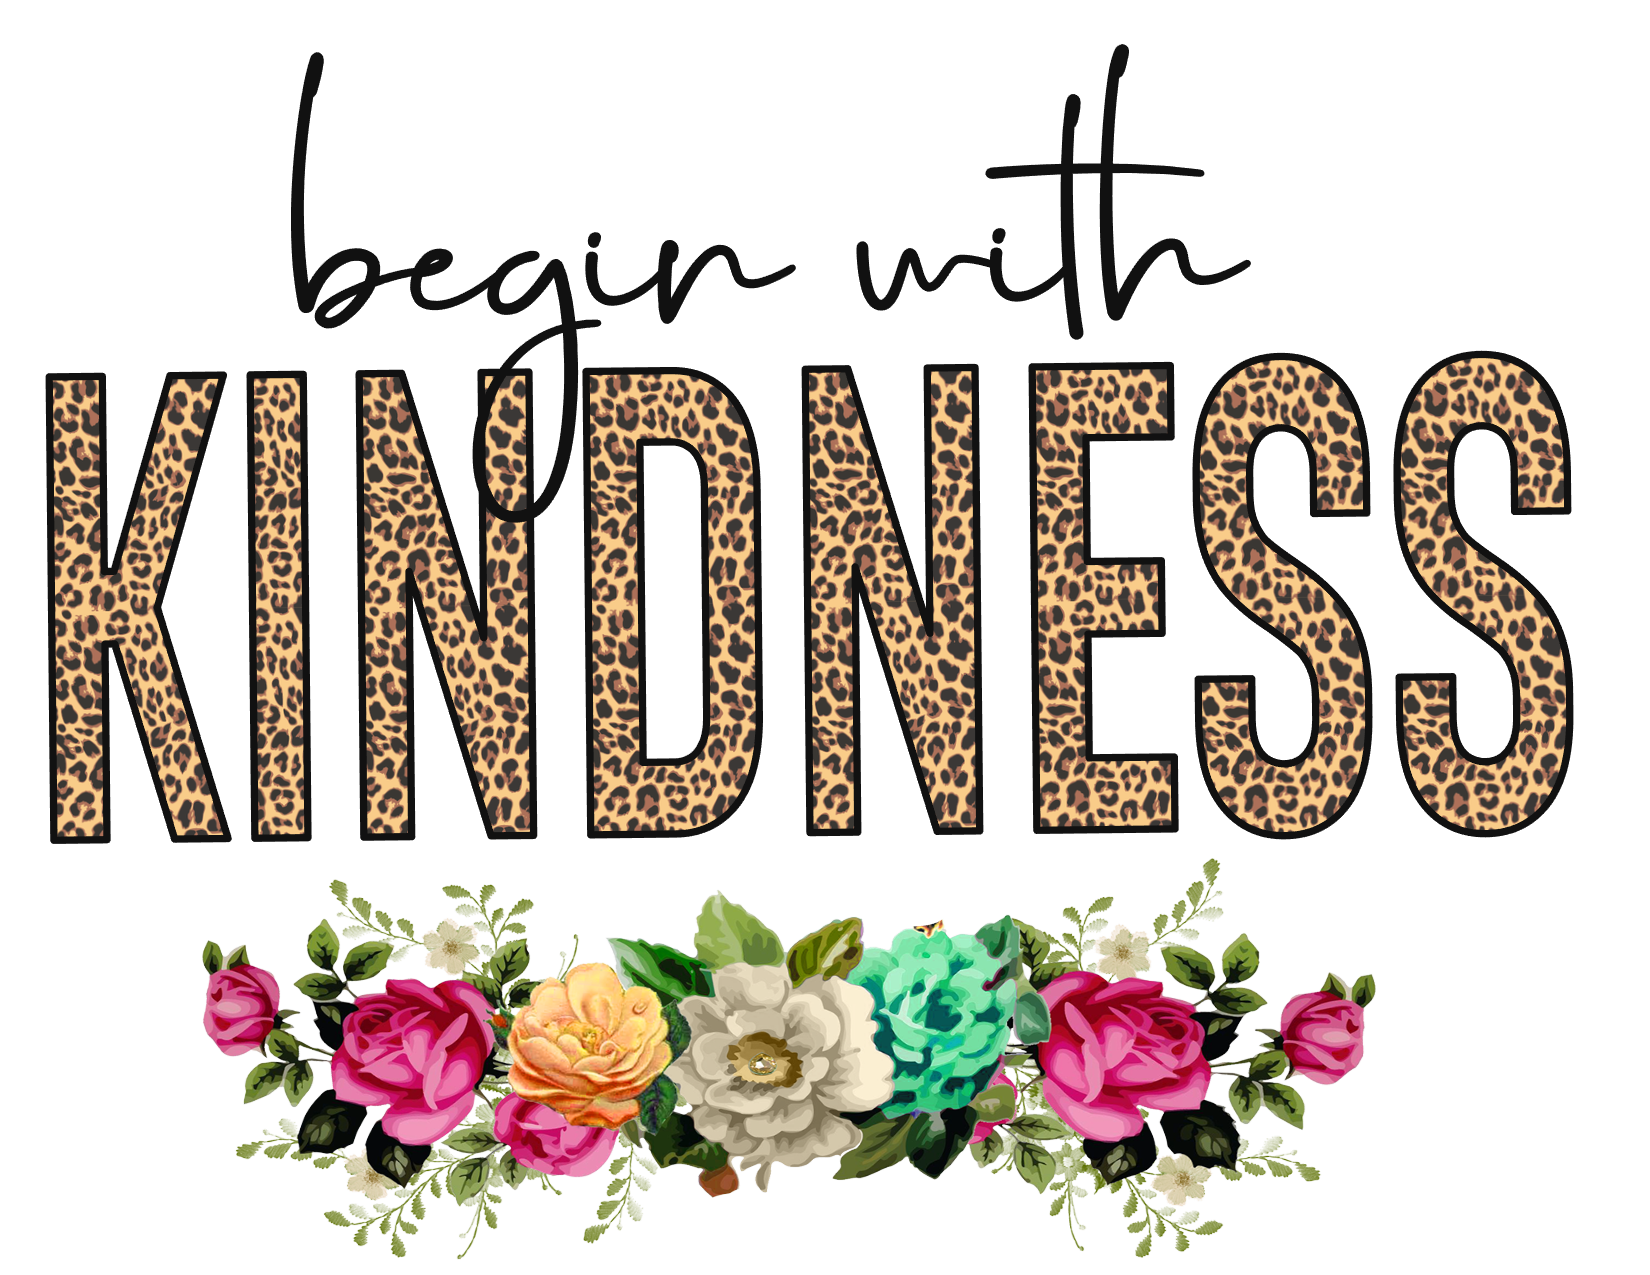 #96 begin with Kindness